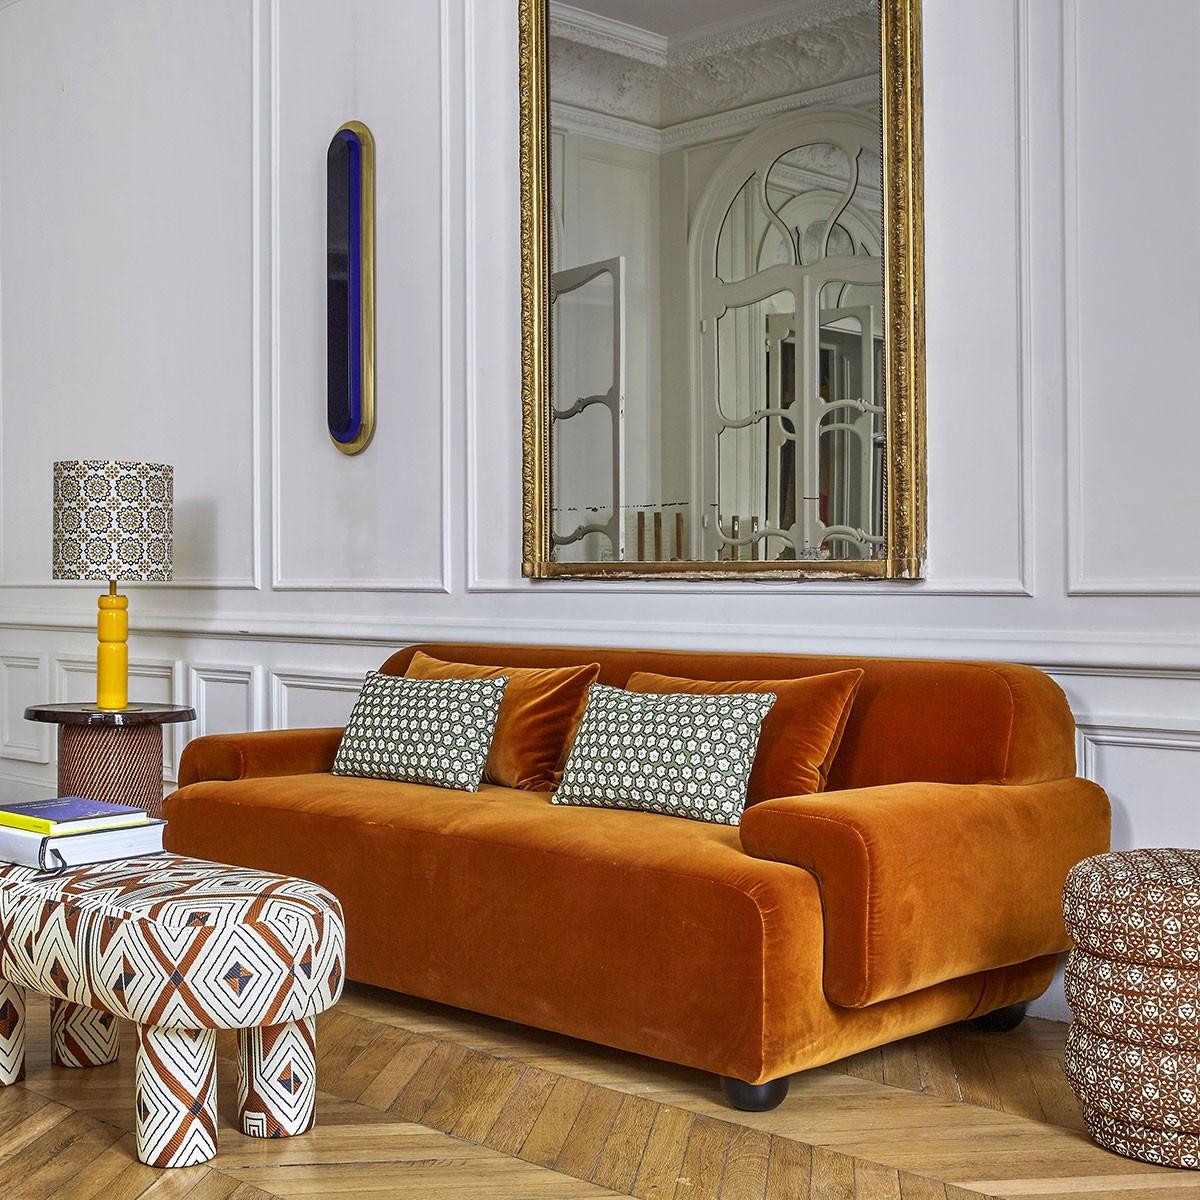 Popus Editions Lena 2.5 seater sofa in Eggplant Megeve fabric with Knit Effect

It looks like it's straight out of a movie, with its generous curves and wide armrests. It is a real invitation to spend long Sundays with the family, comfortably